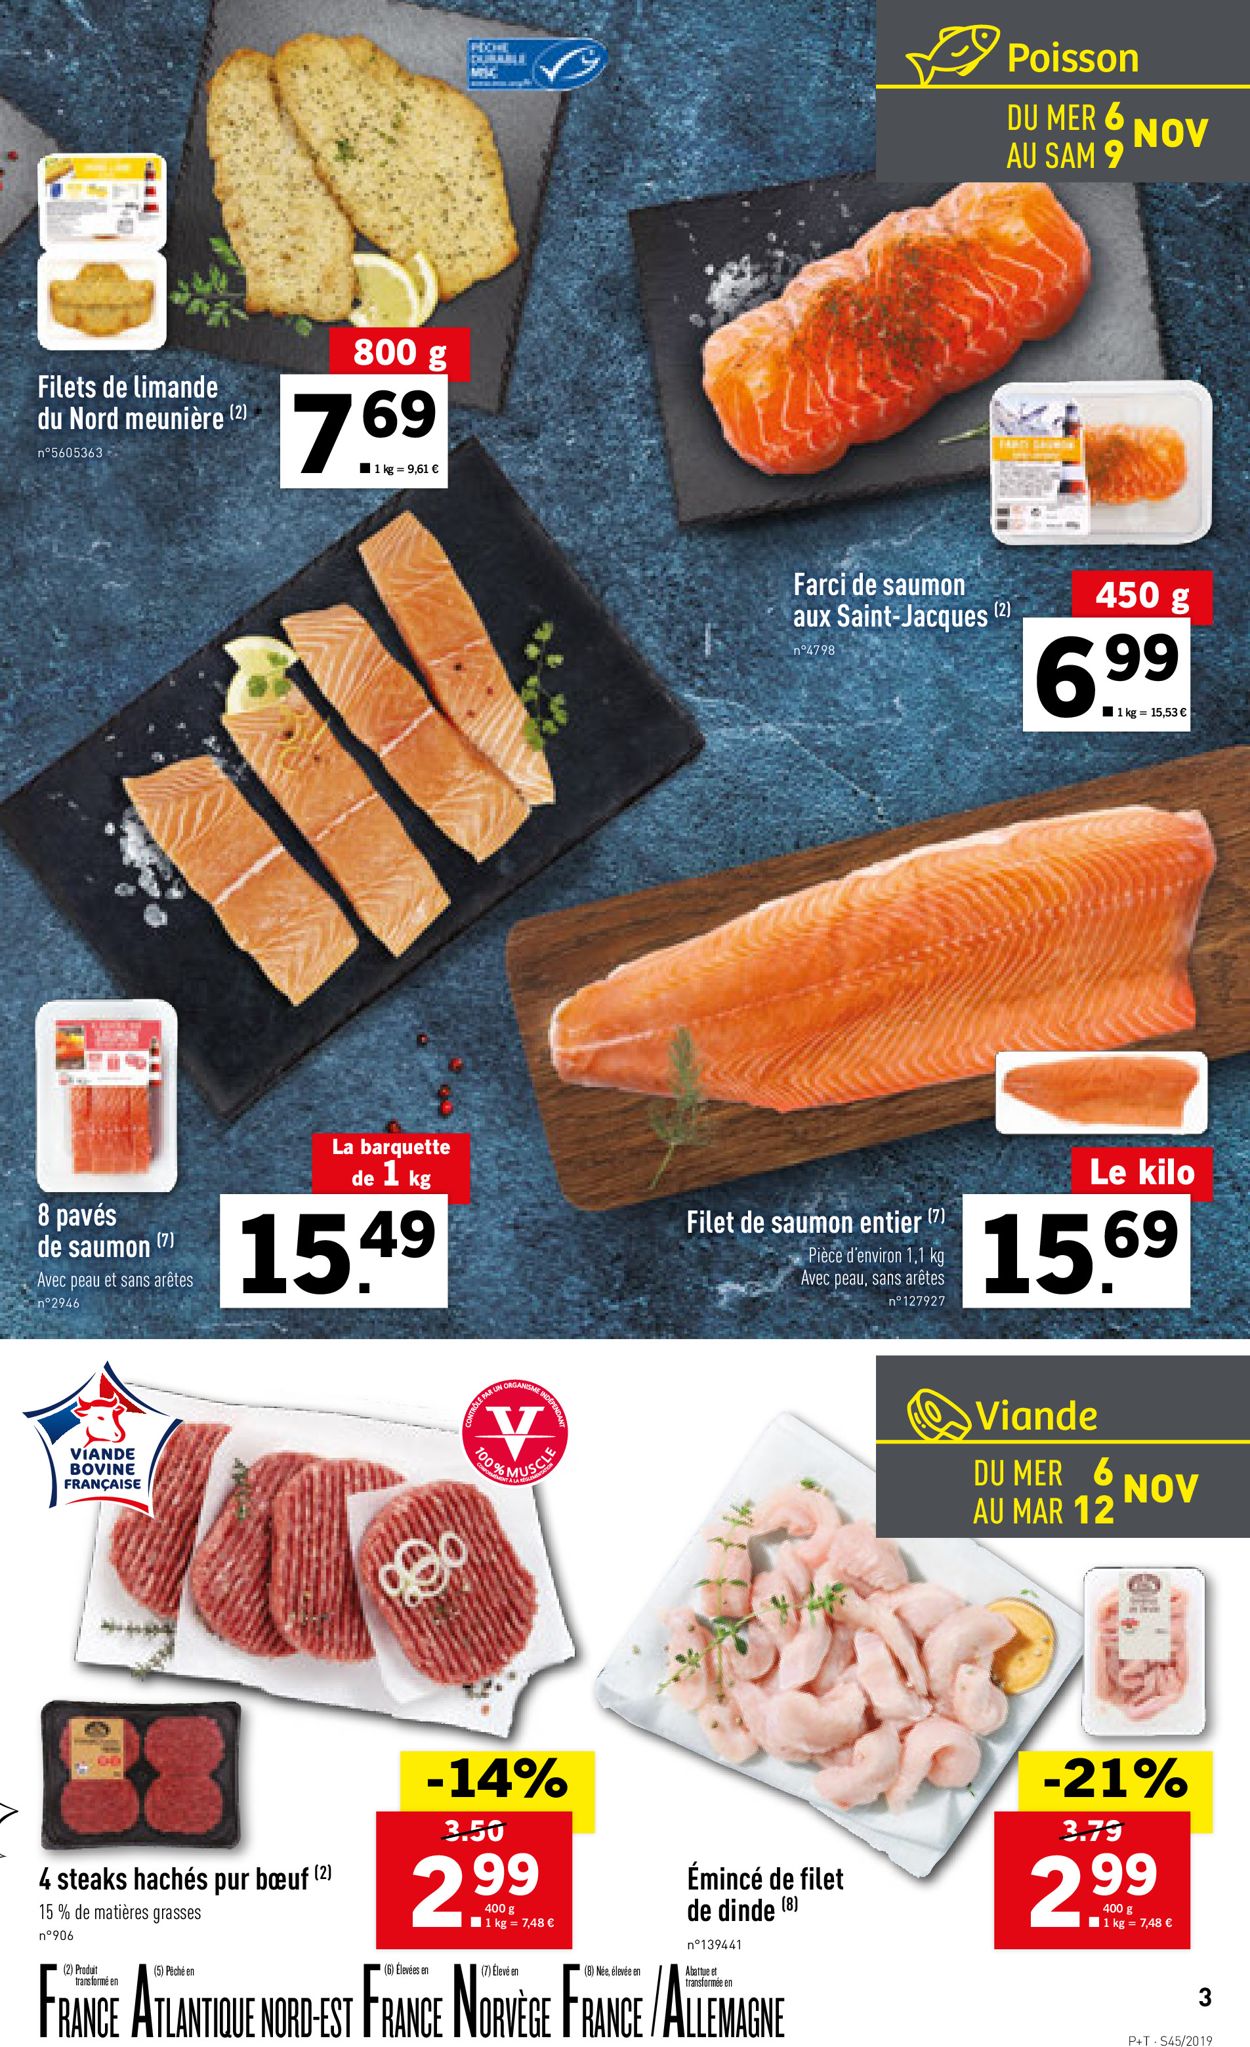 Lidl Catalogue - 06.11-12.11.2019 (Page 3)